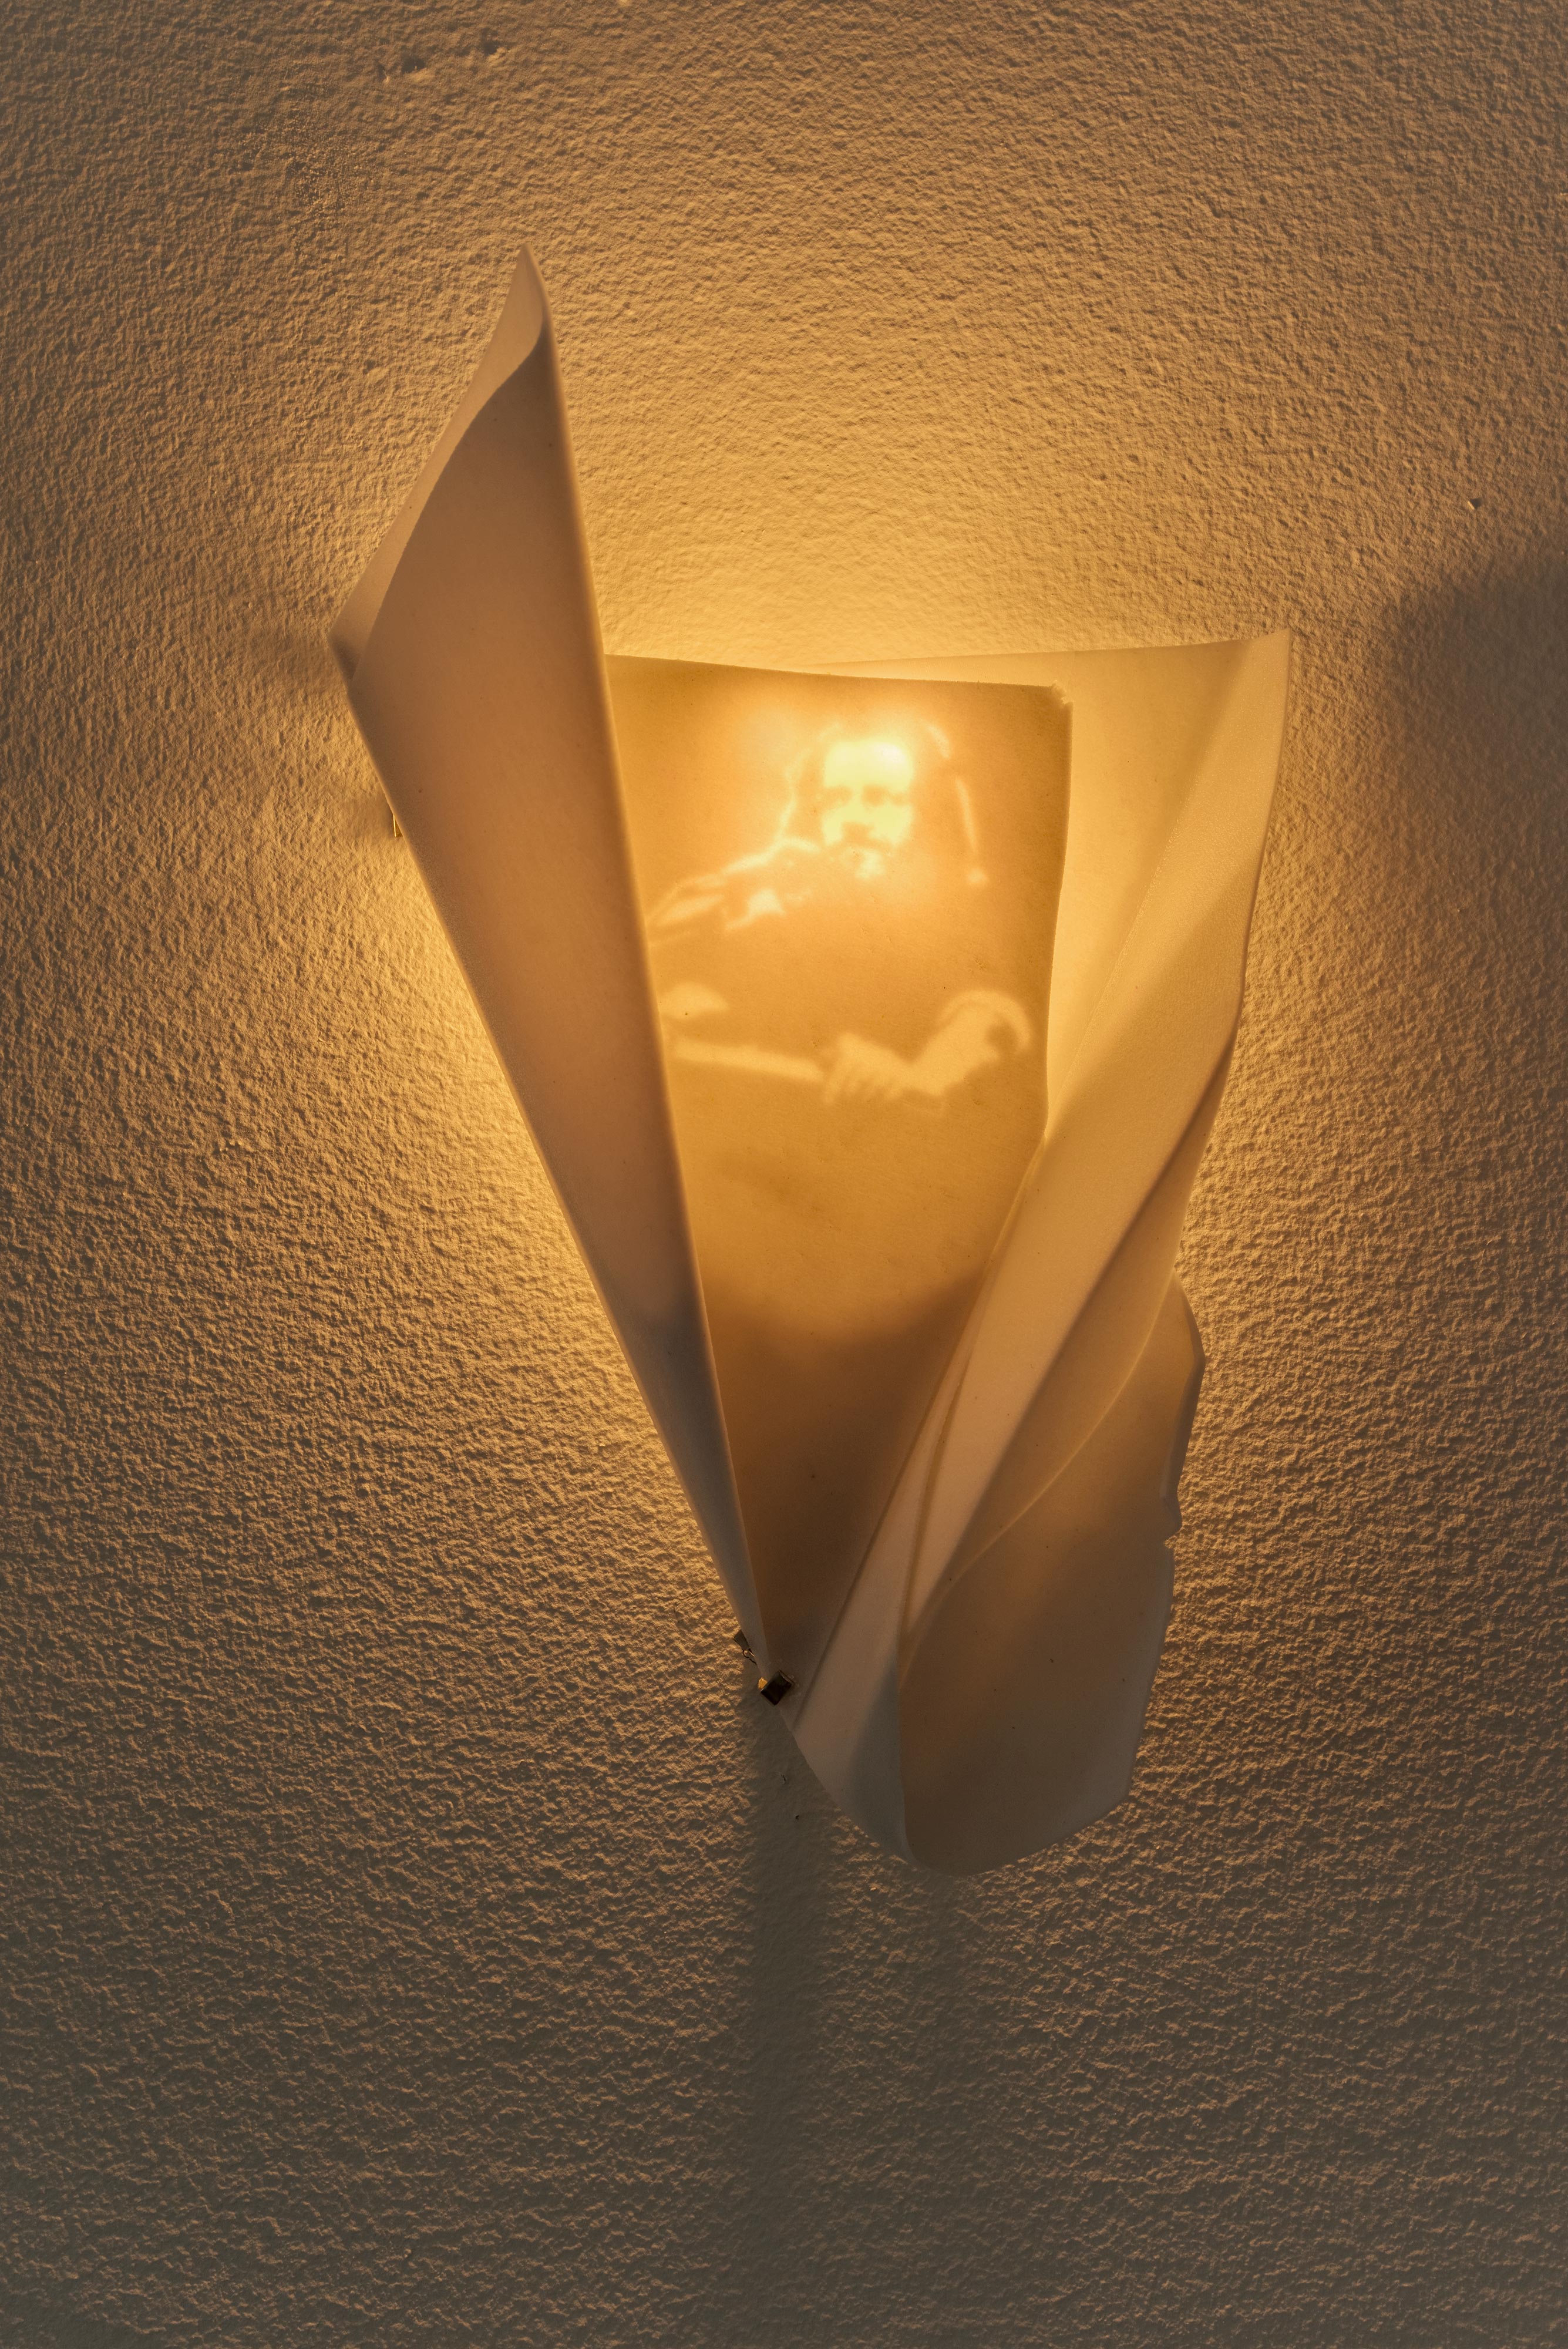 David Muenzer<br>Sconce (This is Water)<br>2016<br>Sandstone, lighting hardware<br>4.938 x 8.028 in (12.5 x 20.4 cm)